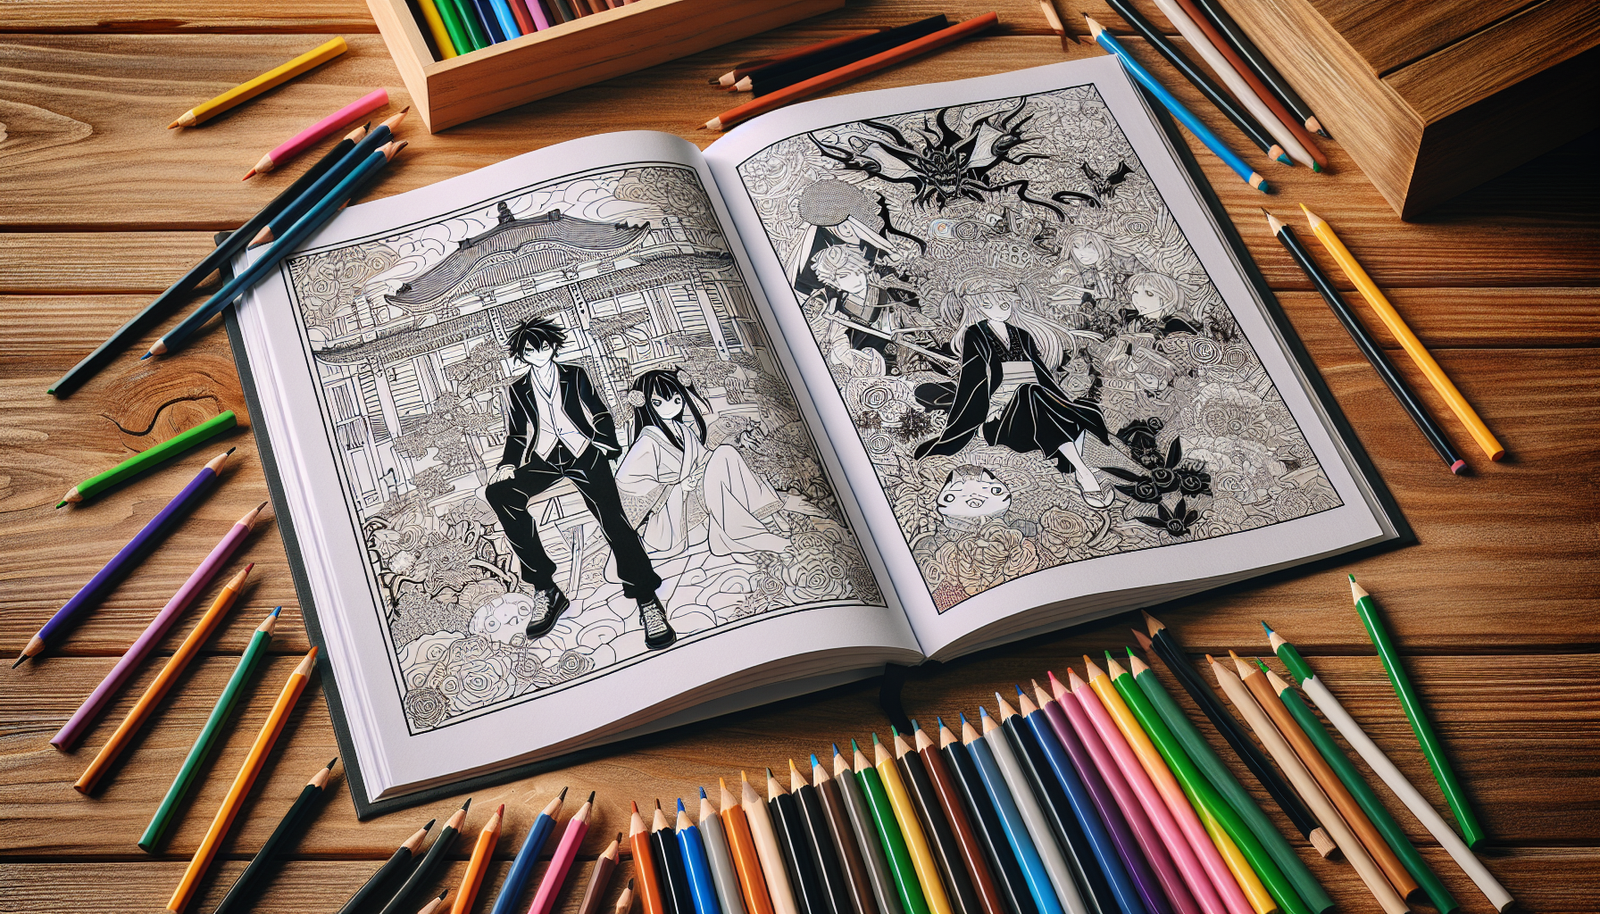 Get Your Free Anime-Style Coloring Book PDF Today!